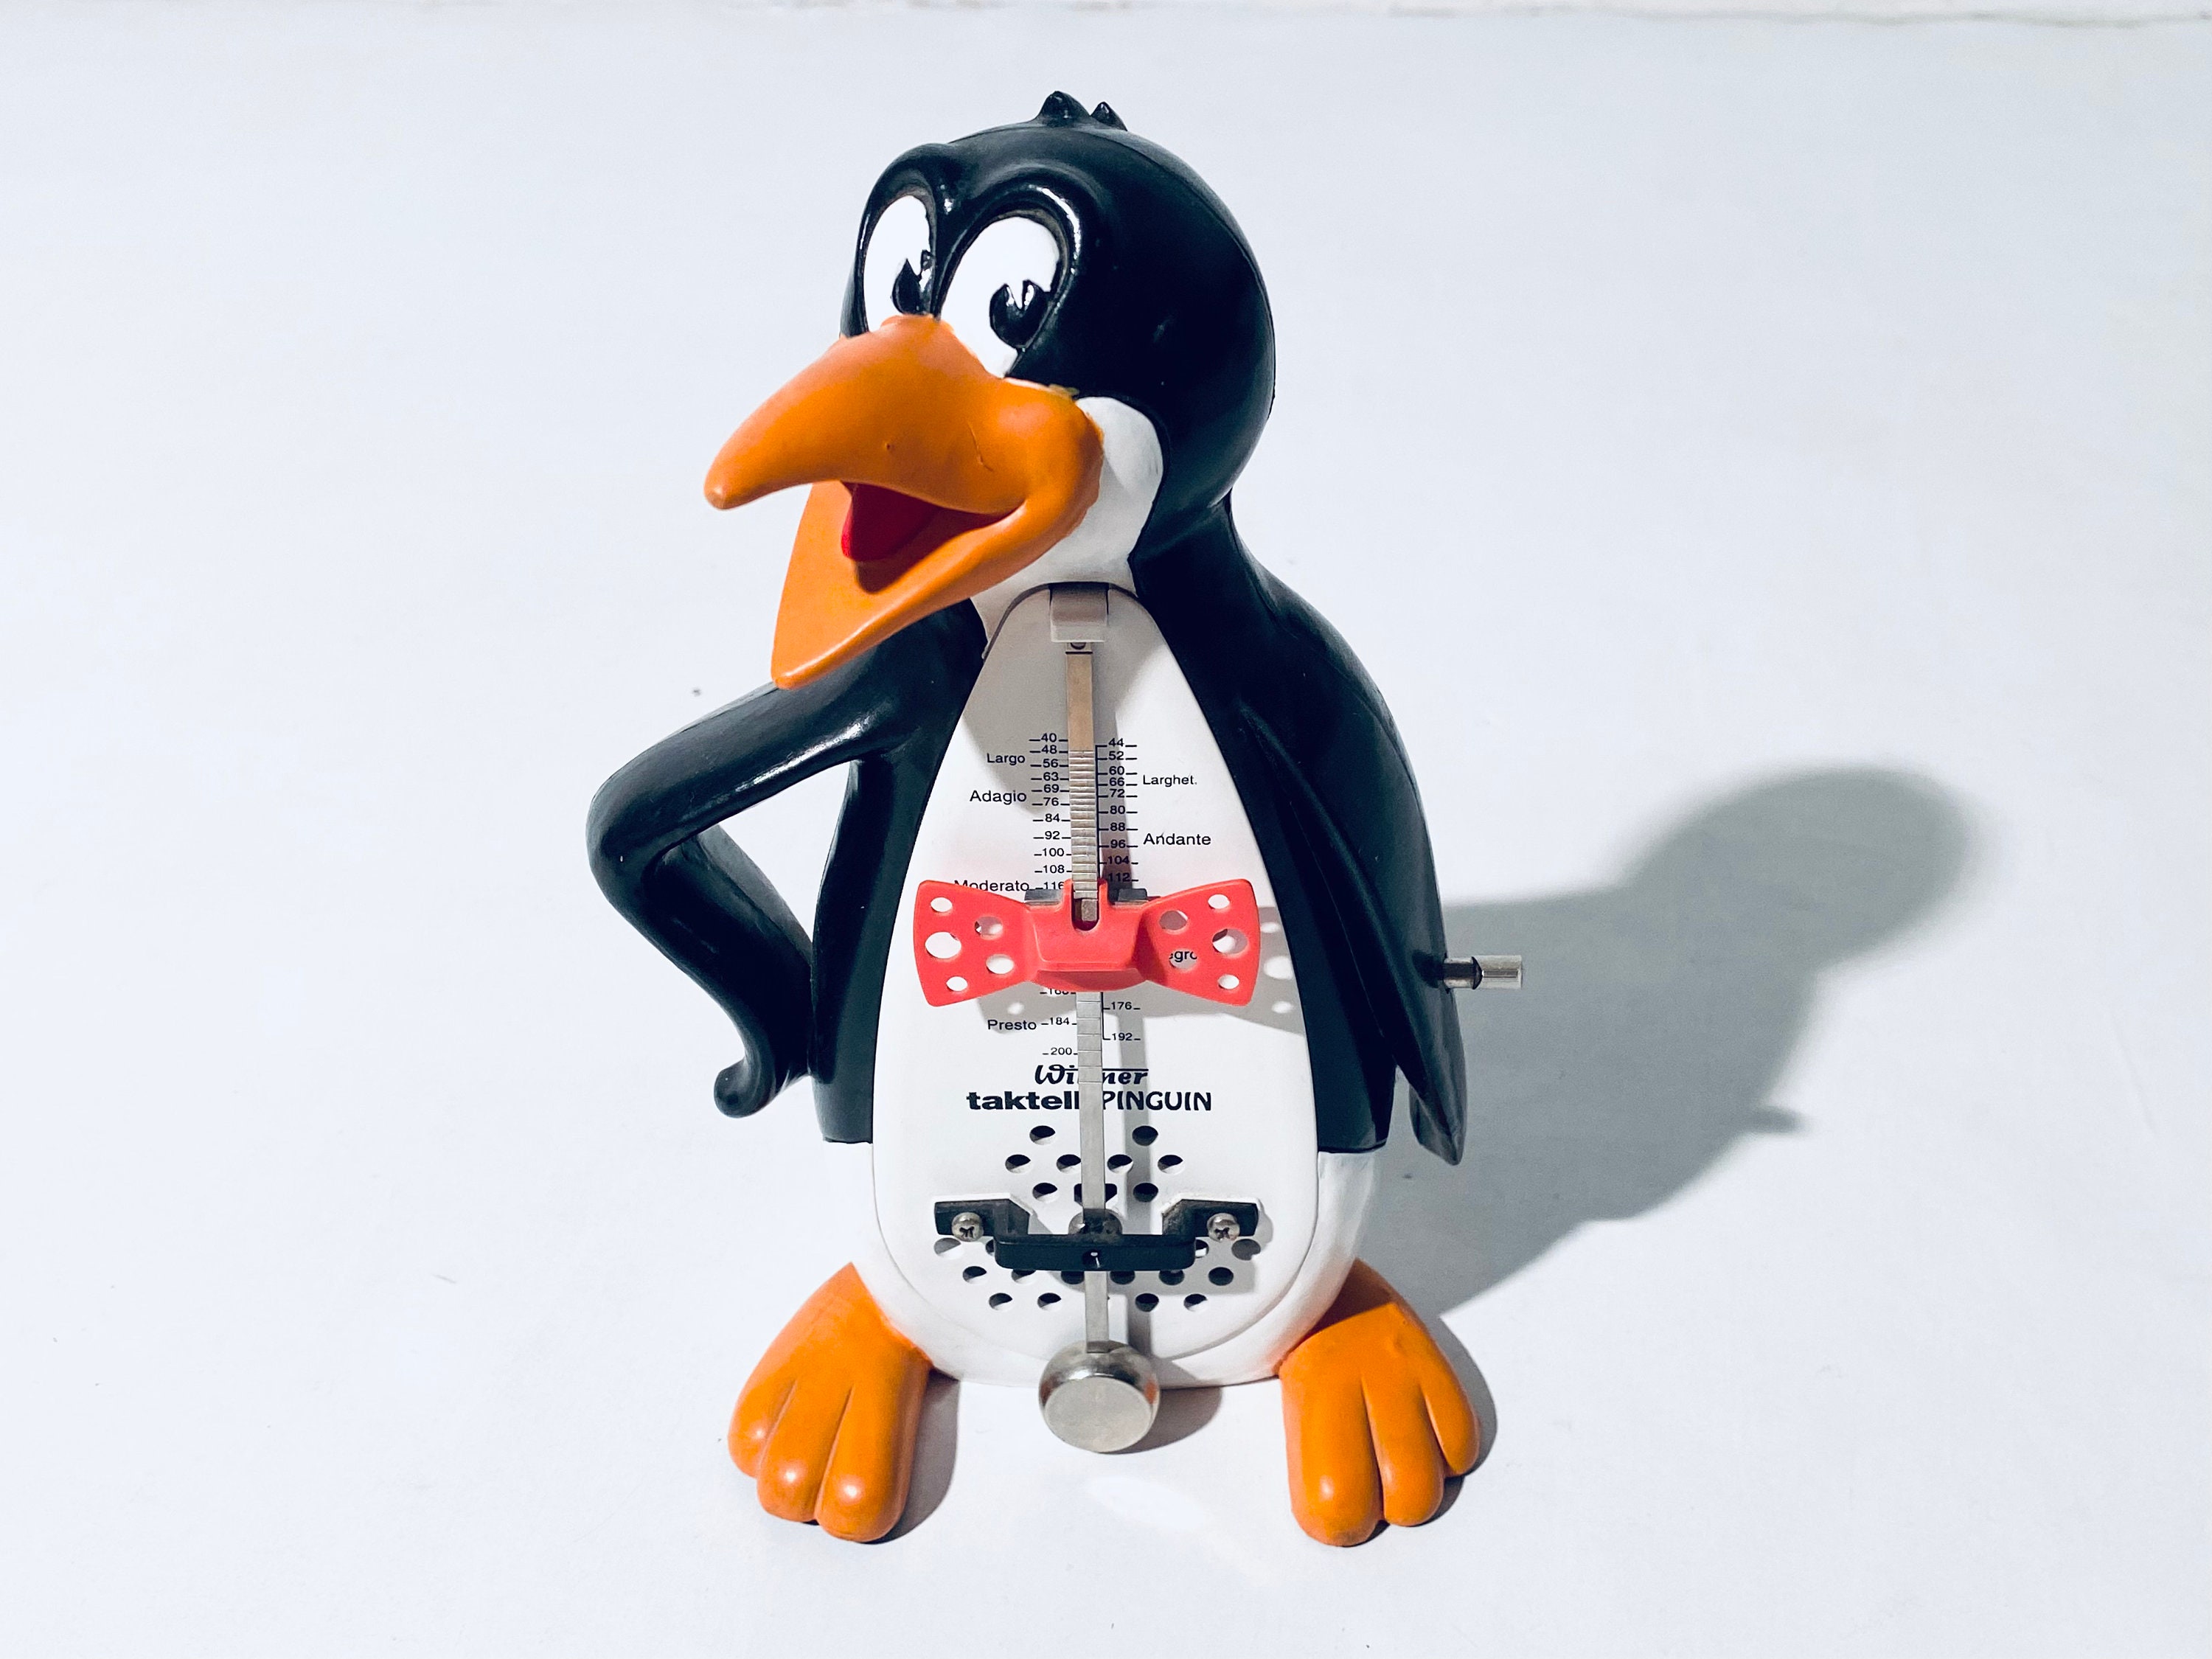 Fisher-Price Linkimals Cool Beats Penguin - Toys At Foys